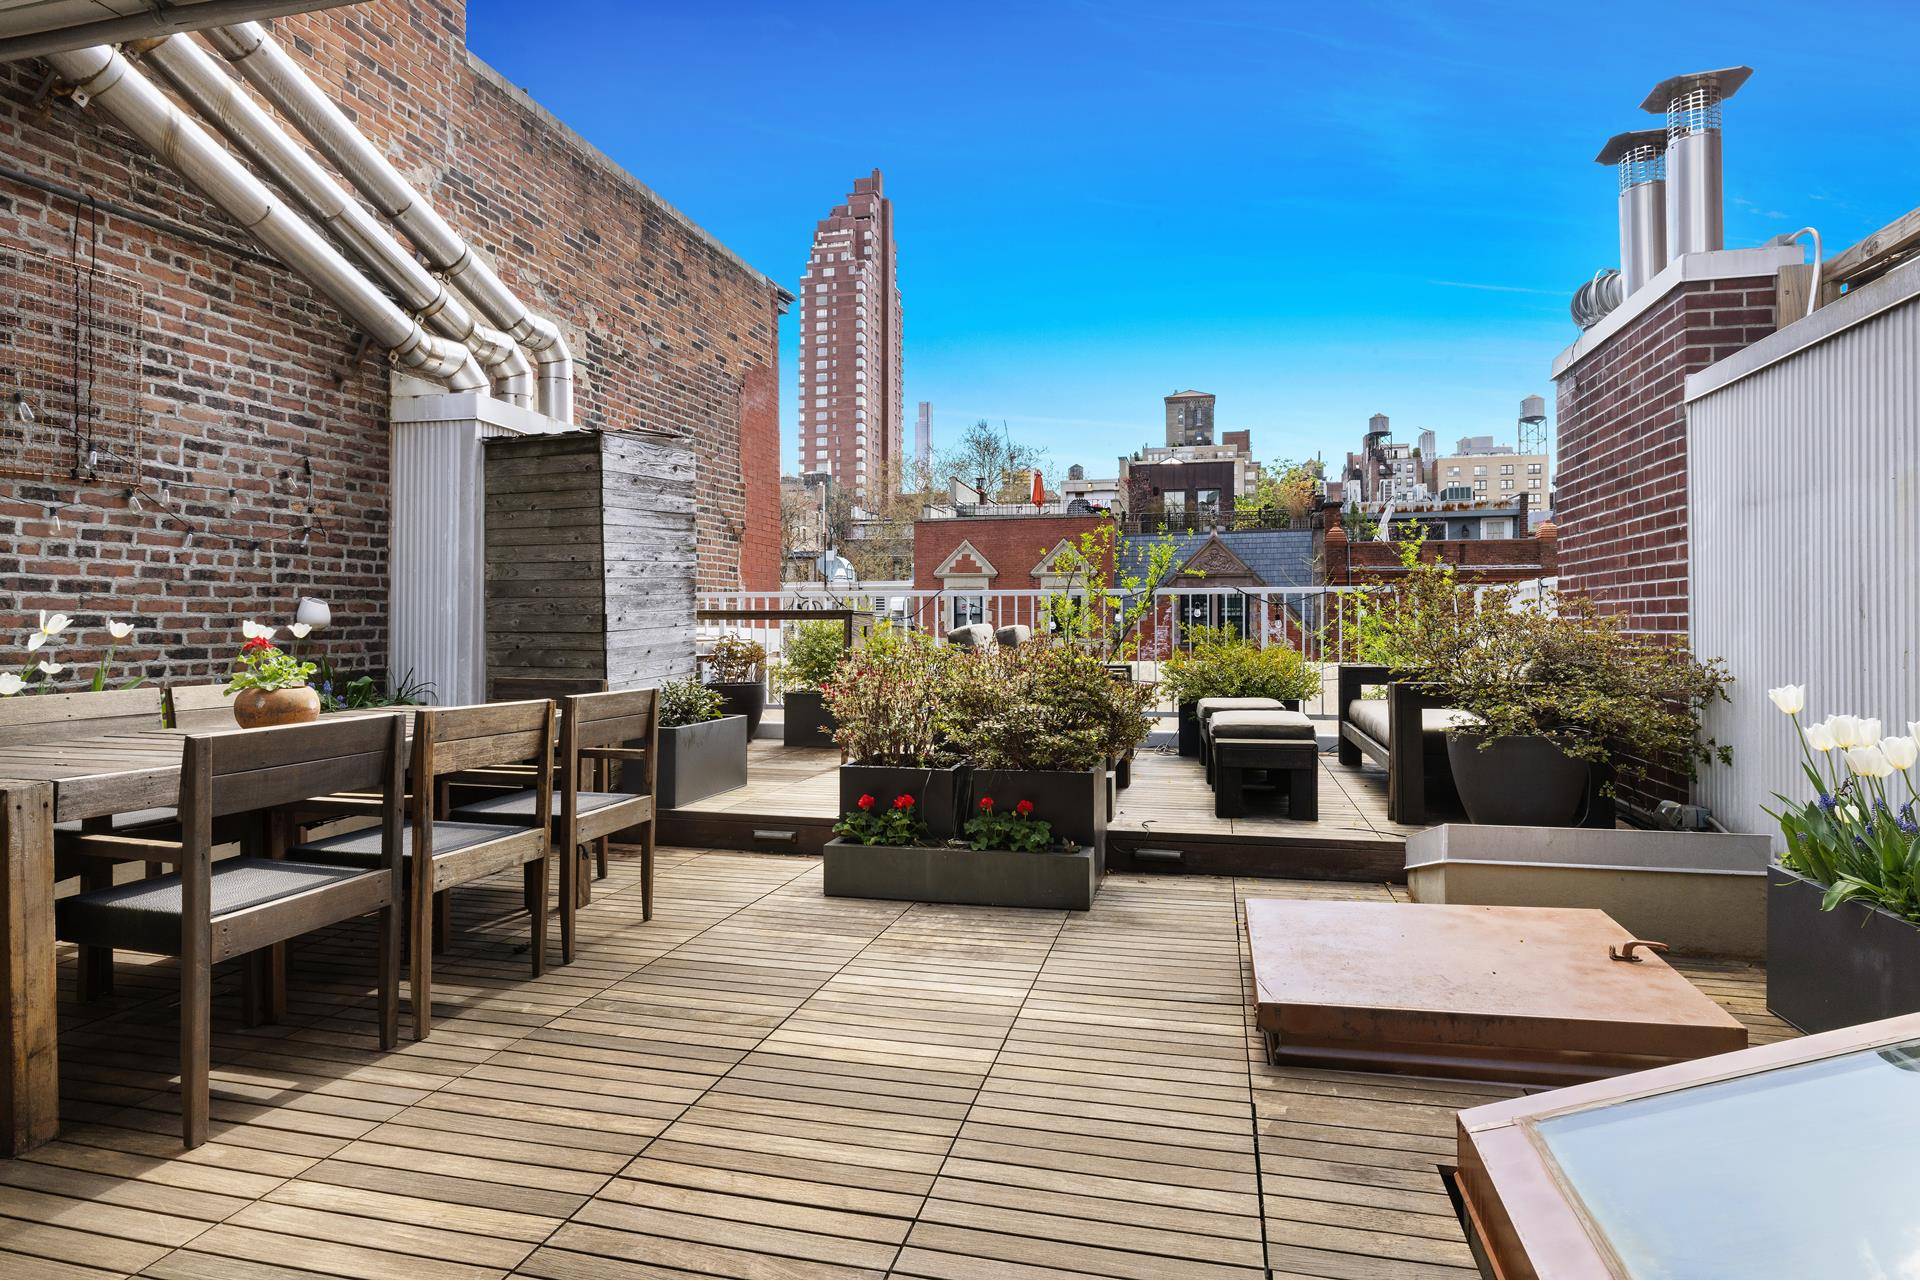 2 Bedroom, 2 Bathroom, 2 Beautiful Outdoor SpacesExplore this 2 bedroom penthouse nestled within a SPACIOUS OUTDOOR OASIS on a picturesque Upper West Side block.